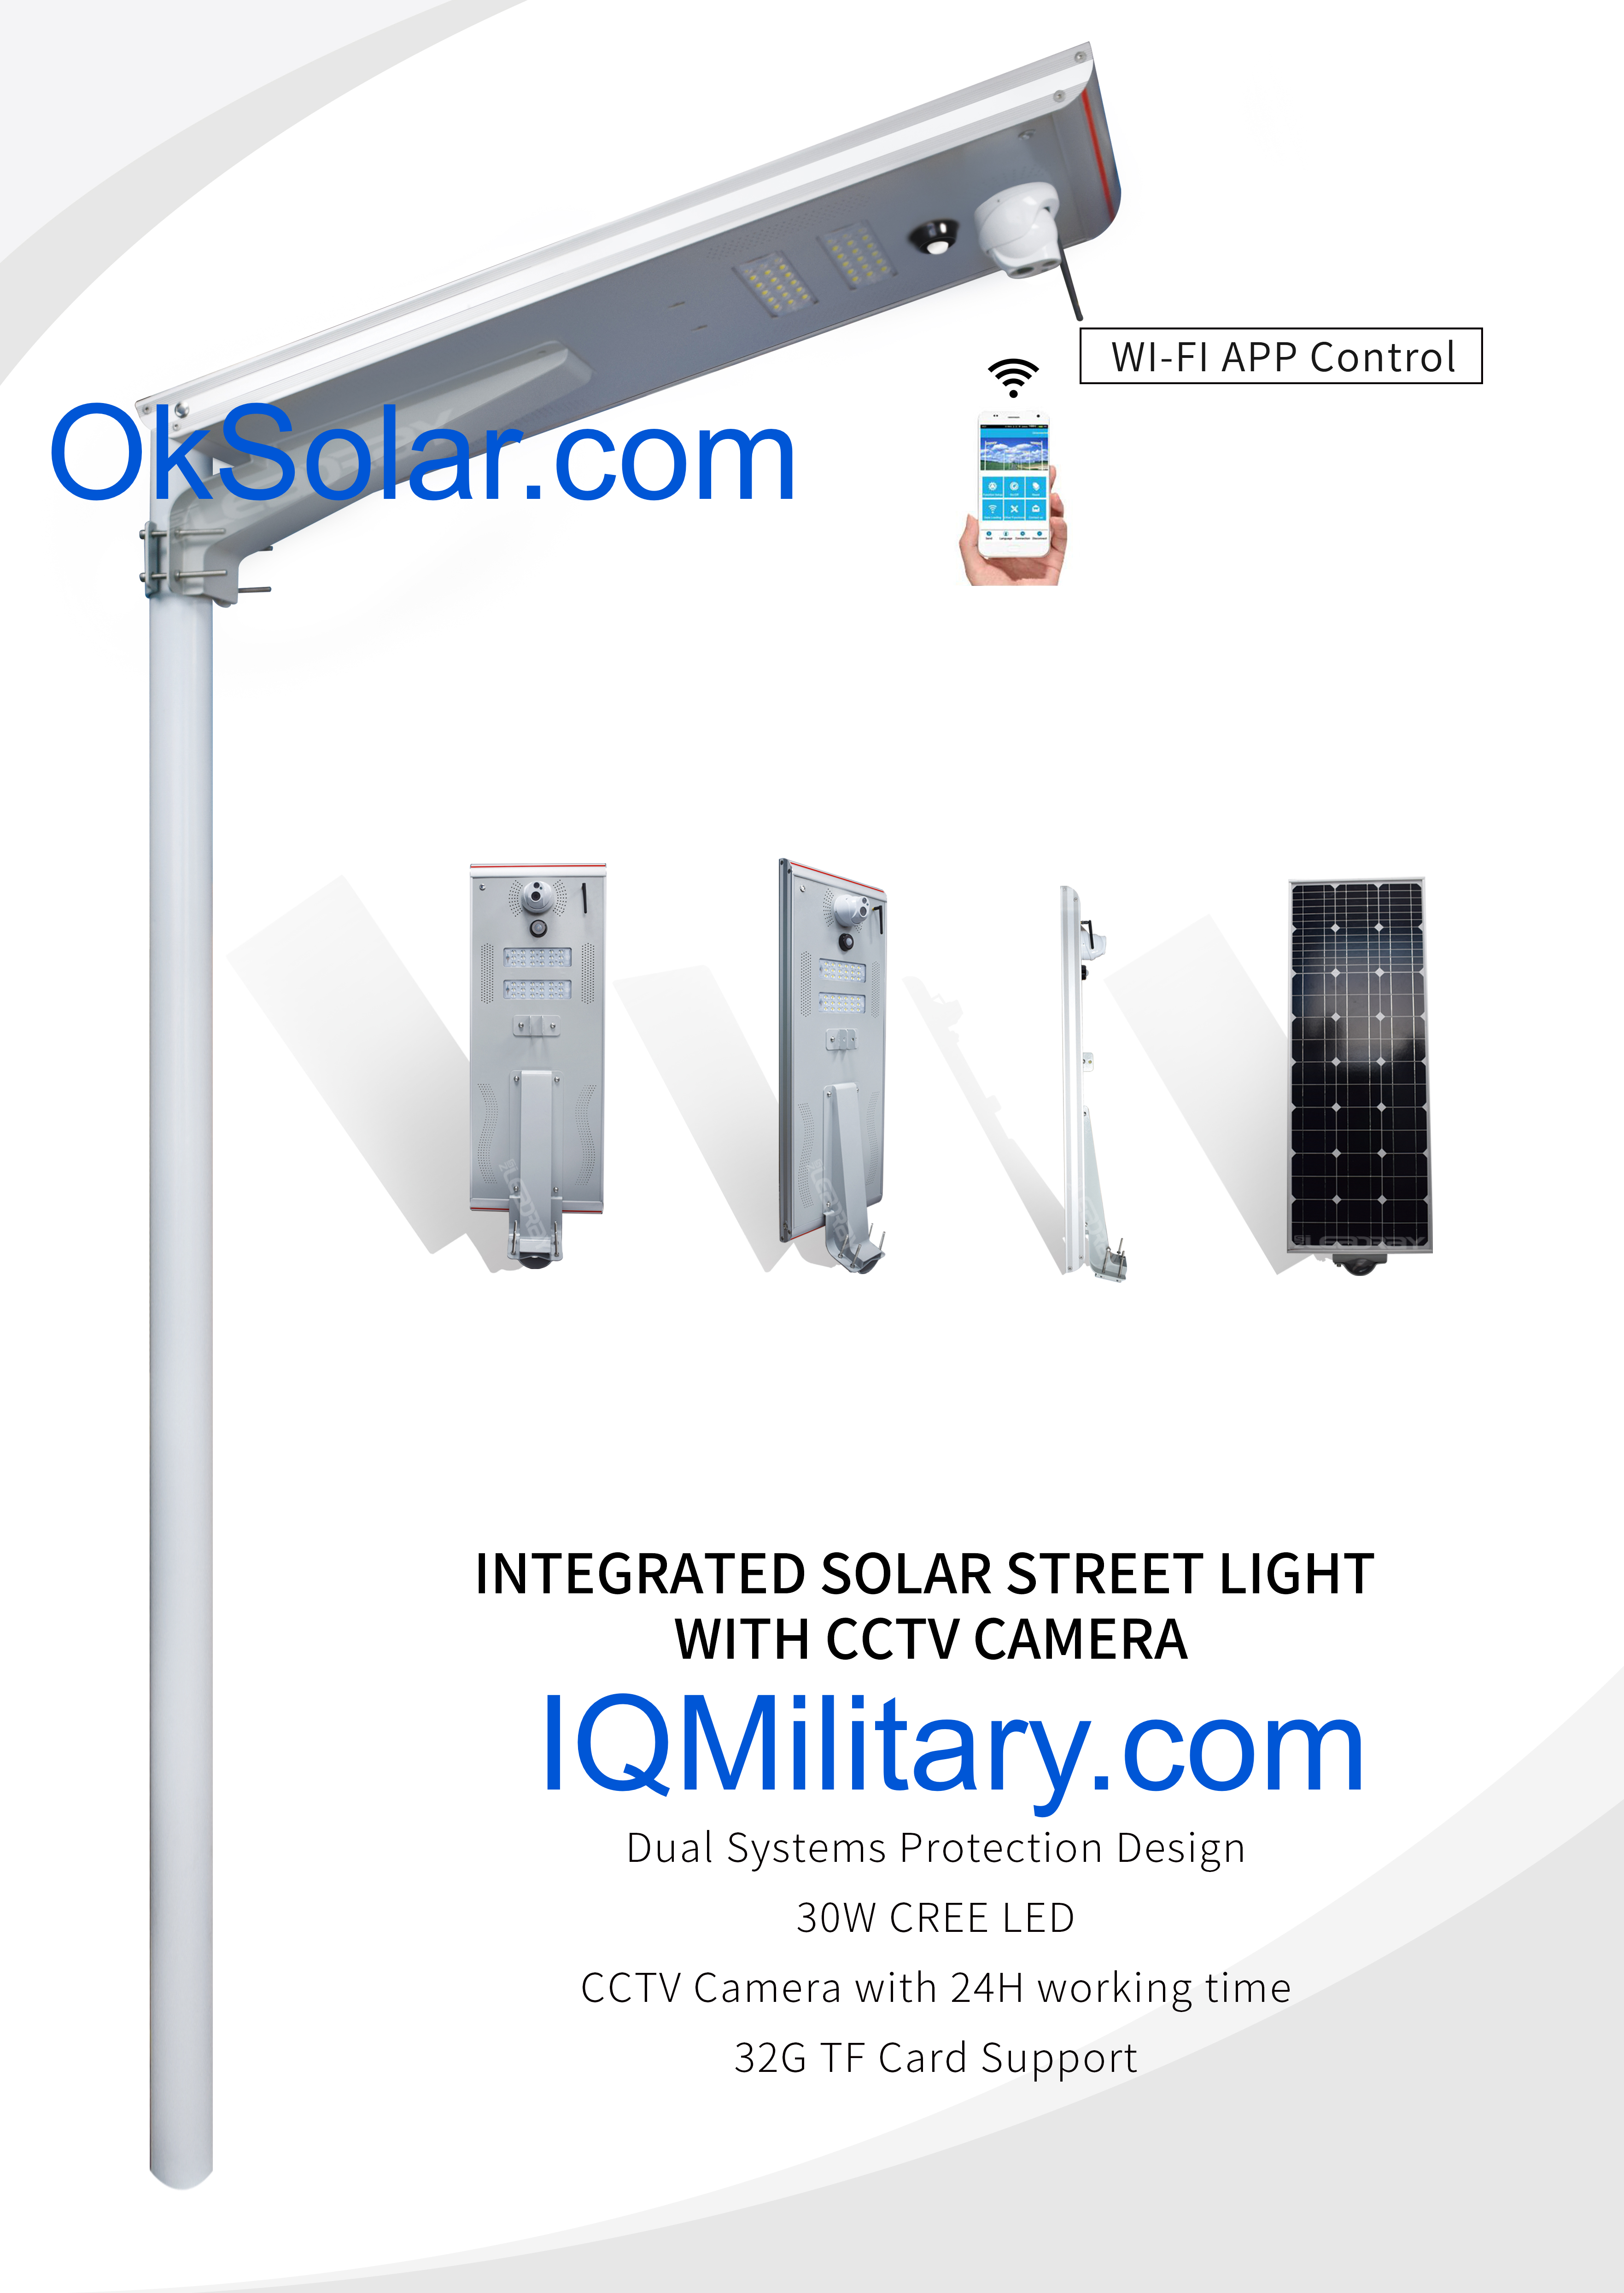 Solar Parking Lot Lights, Solar Parking Lot Lighting Self Contained, Solar Powered Led Lighting System, Solar Street Lighting, Solar Light LED Integrated, Solar Security Lighting, Solar Perimenter Security Lighting, Airport Security Lighting Solar, Bridge Light Solar Powered, Solar Airport Parking Lot Lighting, Solar Light LED Integrated